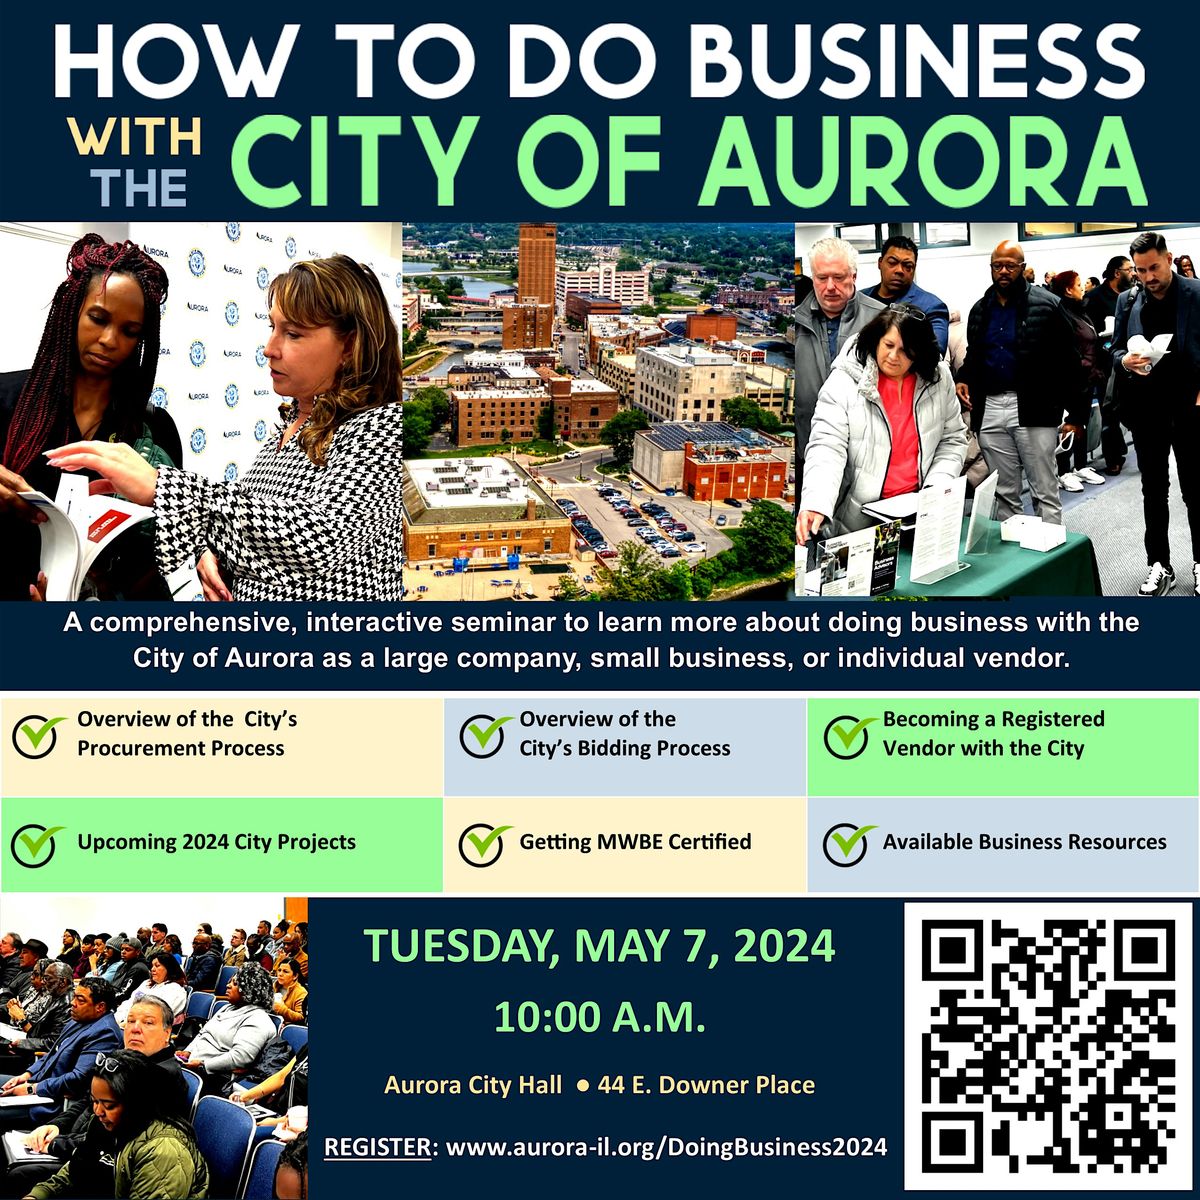 HOW TO DO BUSINESS WITH THE CITY OF AURORA 2024